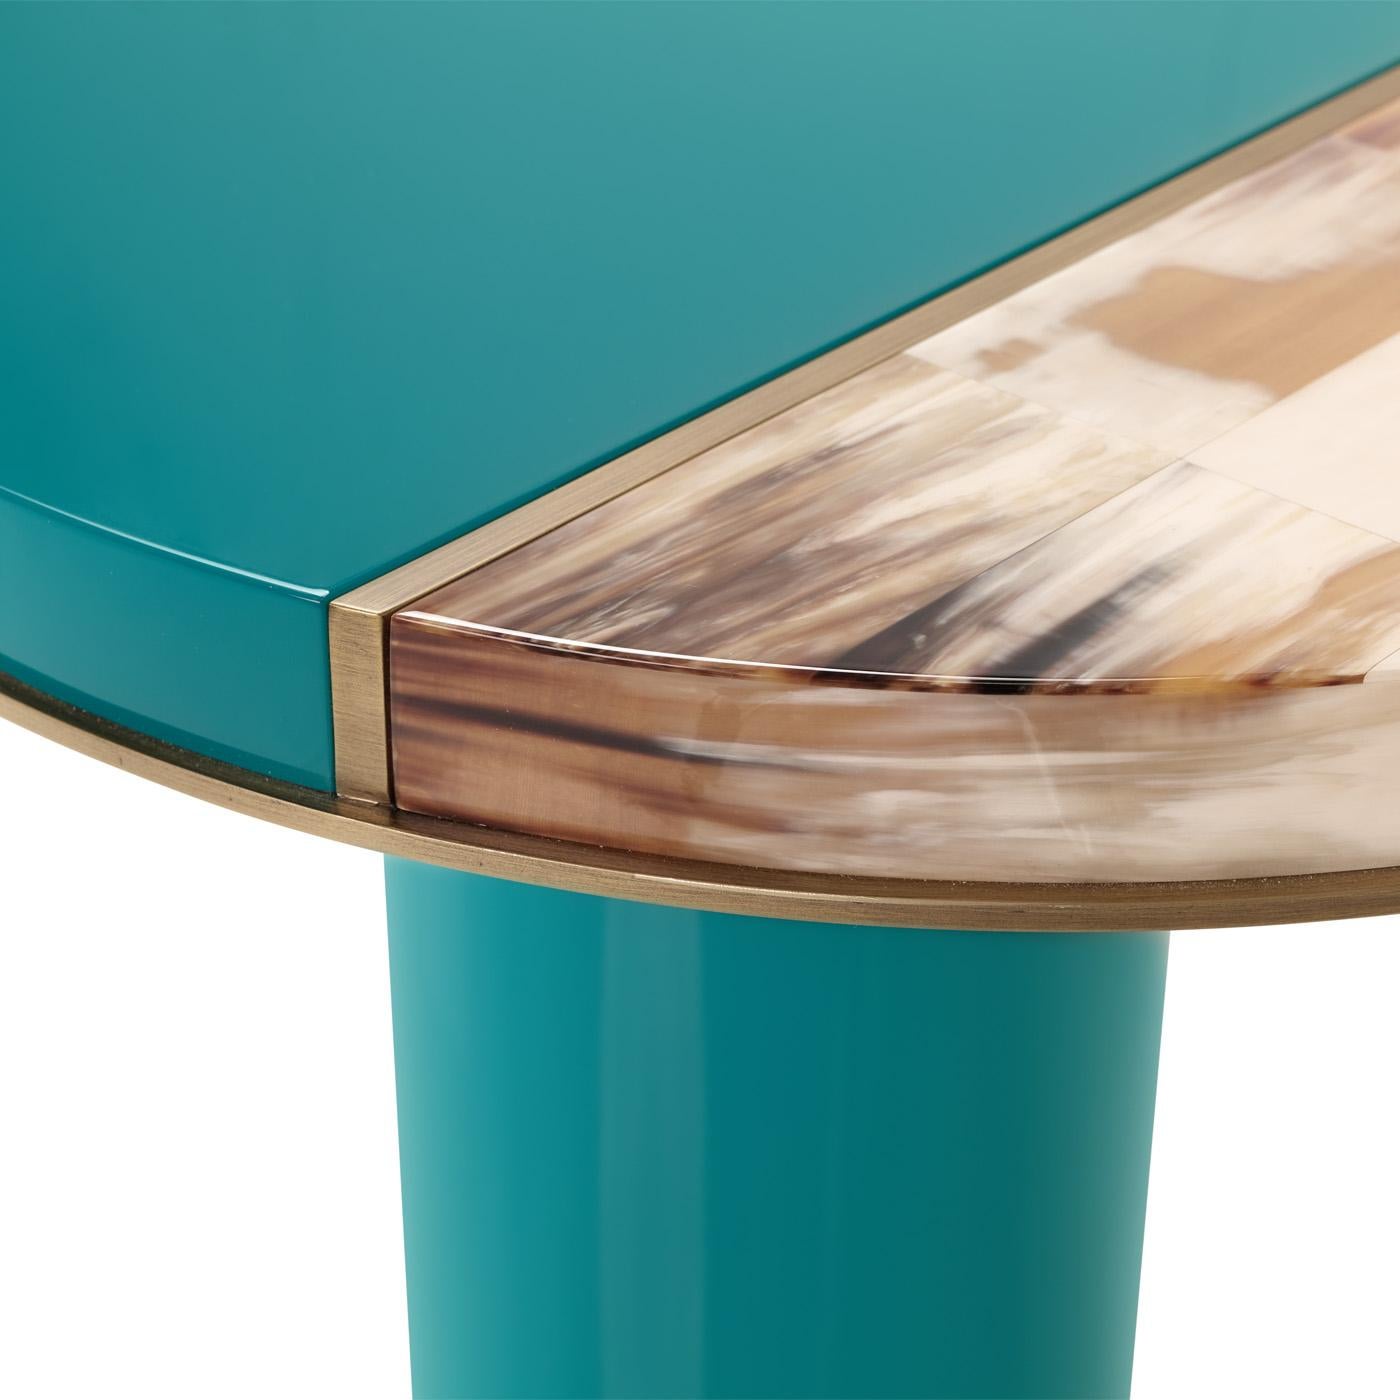 Andria is a refined side table that finds its expressive power in the masterful blend of materials. The top is handcrafted from wood with lacquered water blue finish and adds a captivating appeal to the design. It is elevated by an elegant insert in